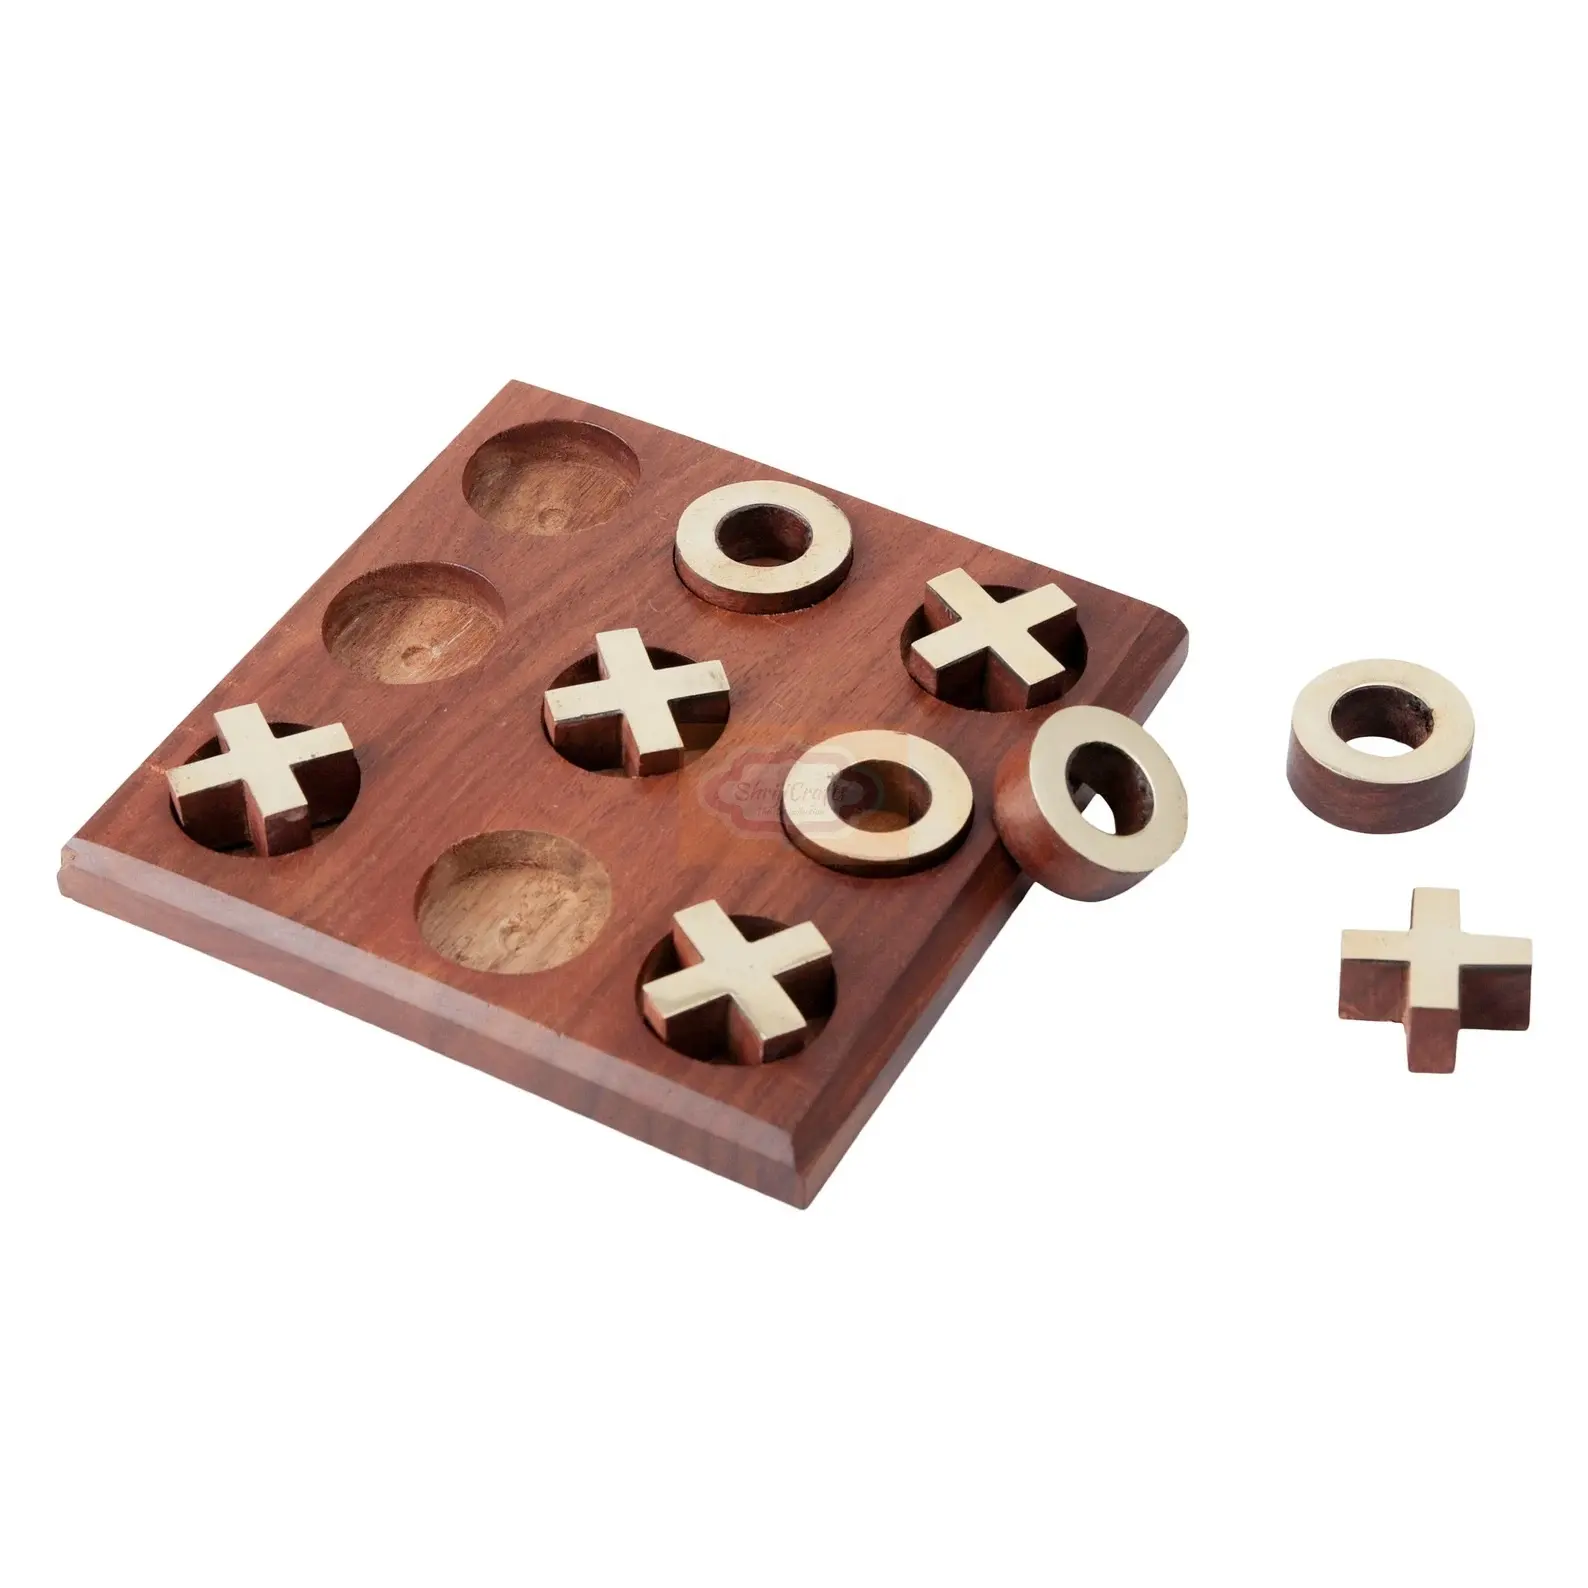 wooden tic tac toe game perfect gifting for birthday Tic Tac Toe Game for Kids and Family Board Games